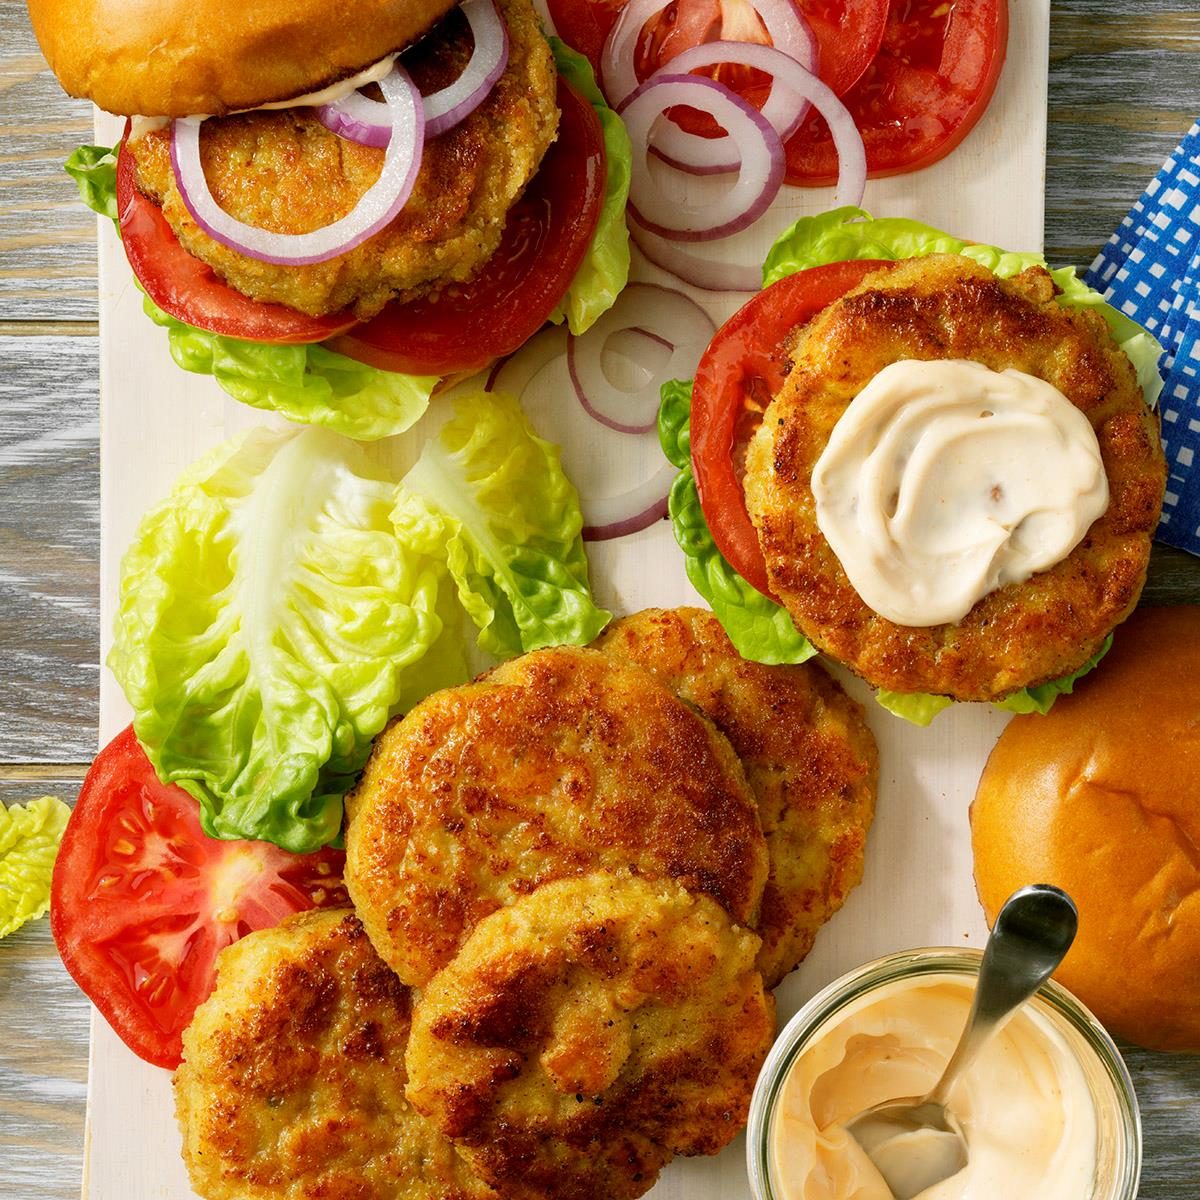 <p>Quite often when we eat at a restaurant, my husband will try something and tell me that I could make it better at home. That was the case with this shrimp patty. It had very few shrimp and needed more flavor. I made some improvements and now it's one my husband's favorites. — Tina Jacobs, Hurlock, Maryland</p> <div class="listicle-page__buttons"> <div class="listicle-page__cta-button"><a href='https://www.tasteofhome.com/recipes/shrimp-patty-sandwiches/'>Go to Recipe</a></div> </div>